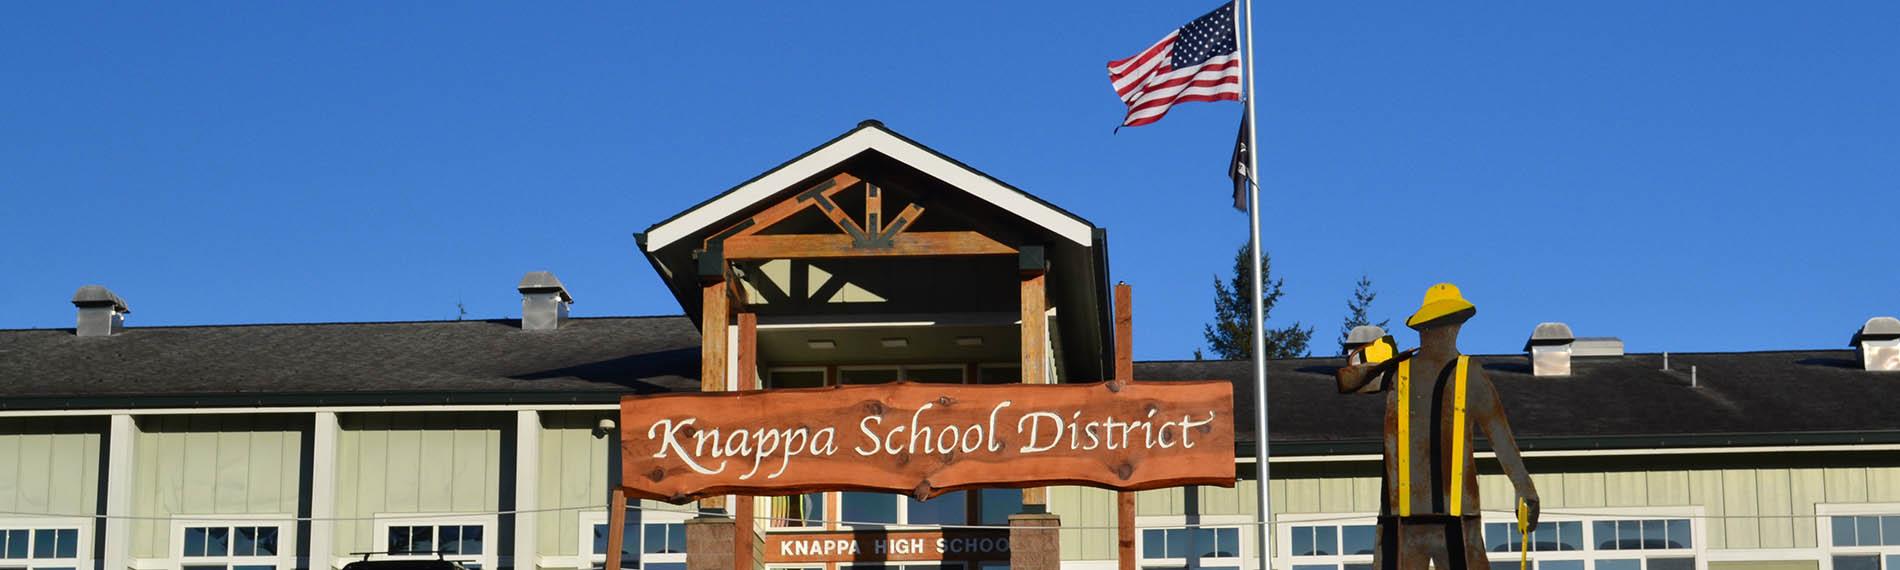 Knappa School District sign and metal Logger in front of the high school building with American flag in the background